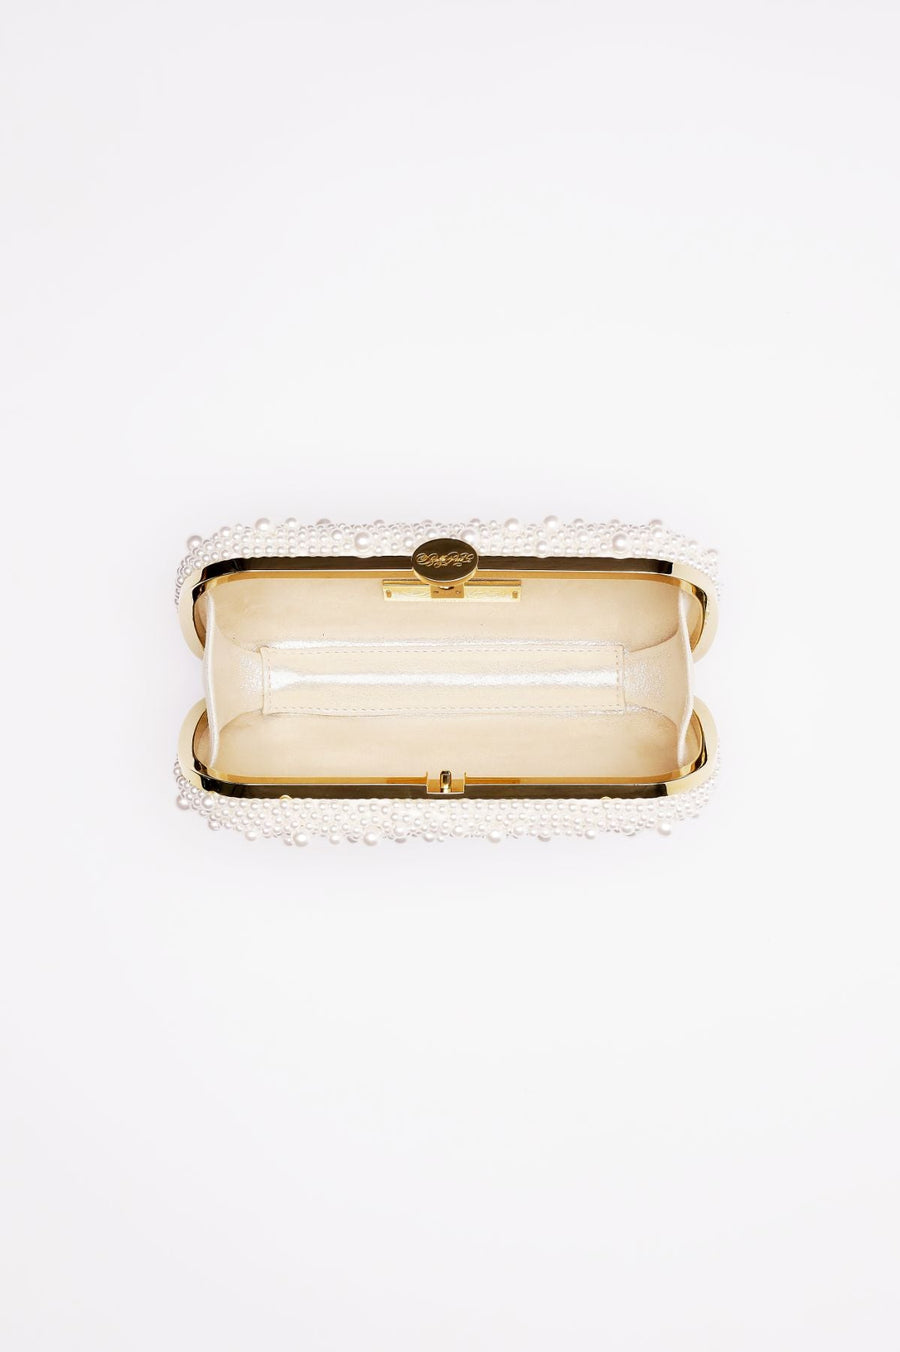 An open, empty The Bella Rosa Collection True Love Pearl Clutch purse against a white background.